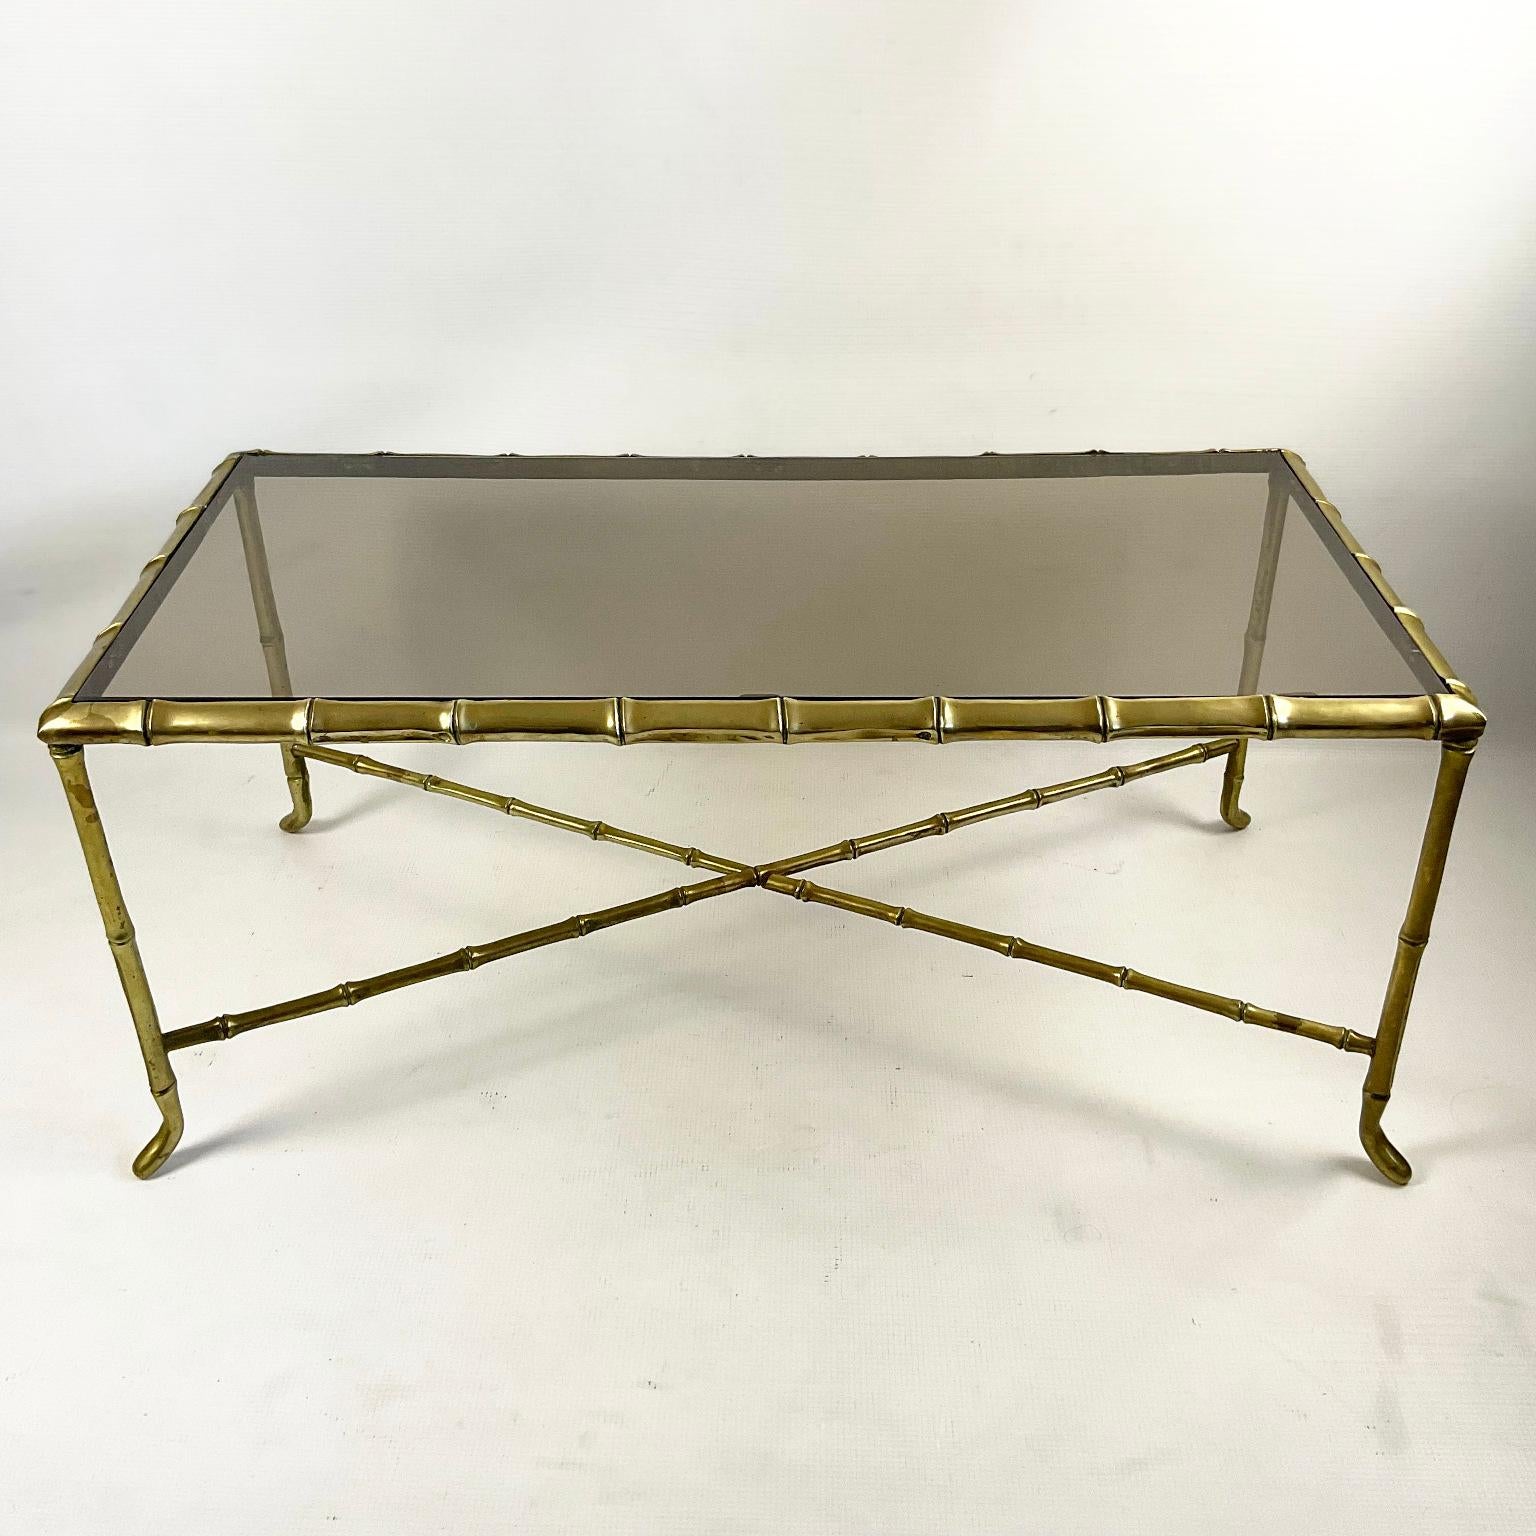 This coffee table from the late 1940s is attributed to Maison Baguès. The Faux Bamboo frame of this coffee table is made of quality bronze with a brand-new cognac safety glass top.

